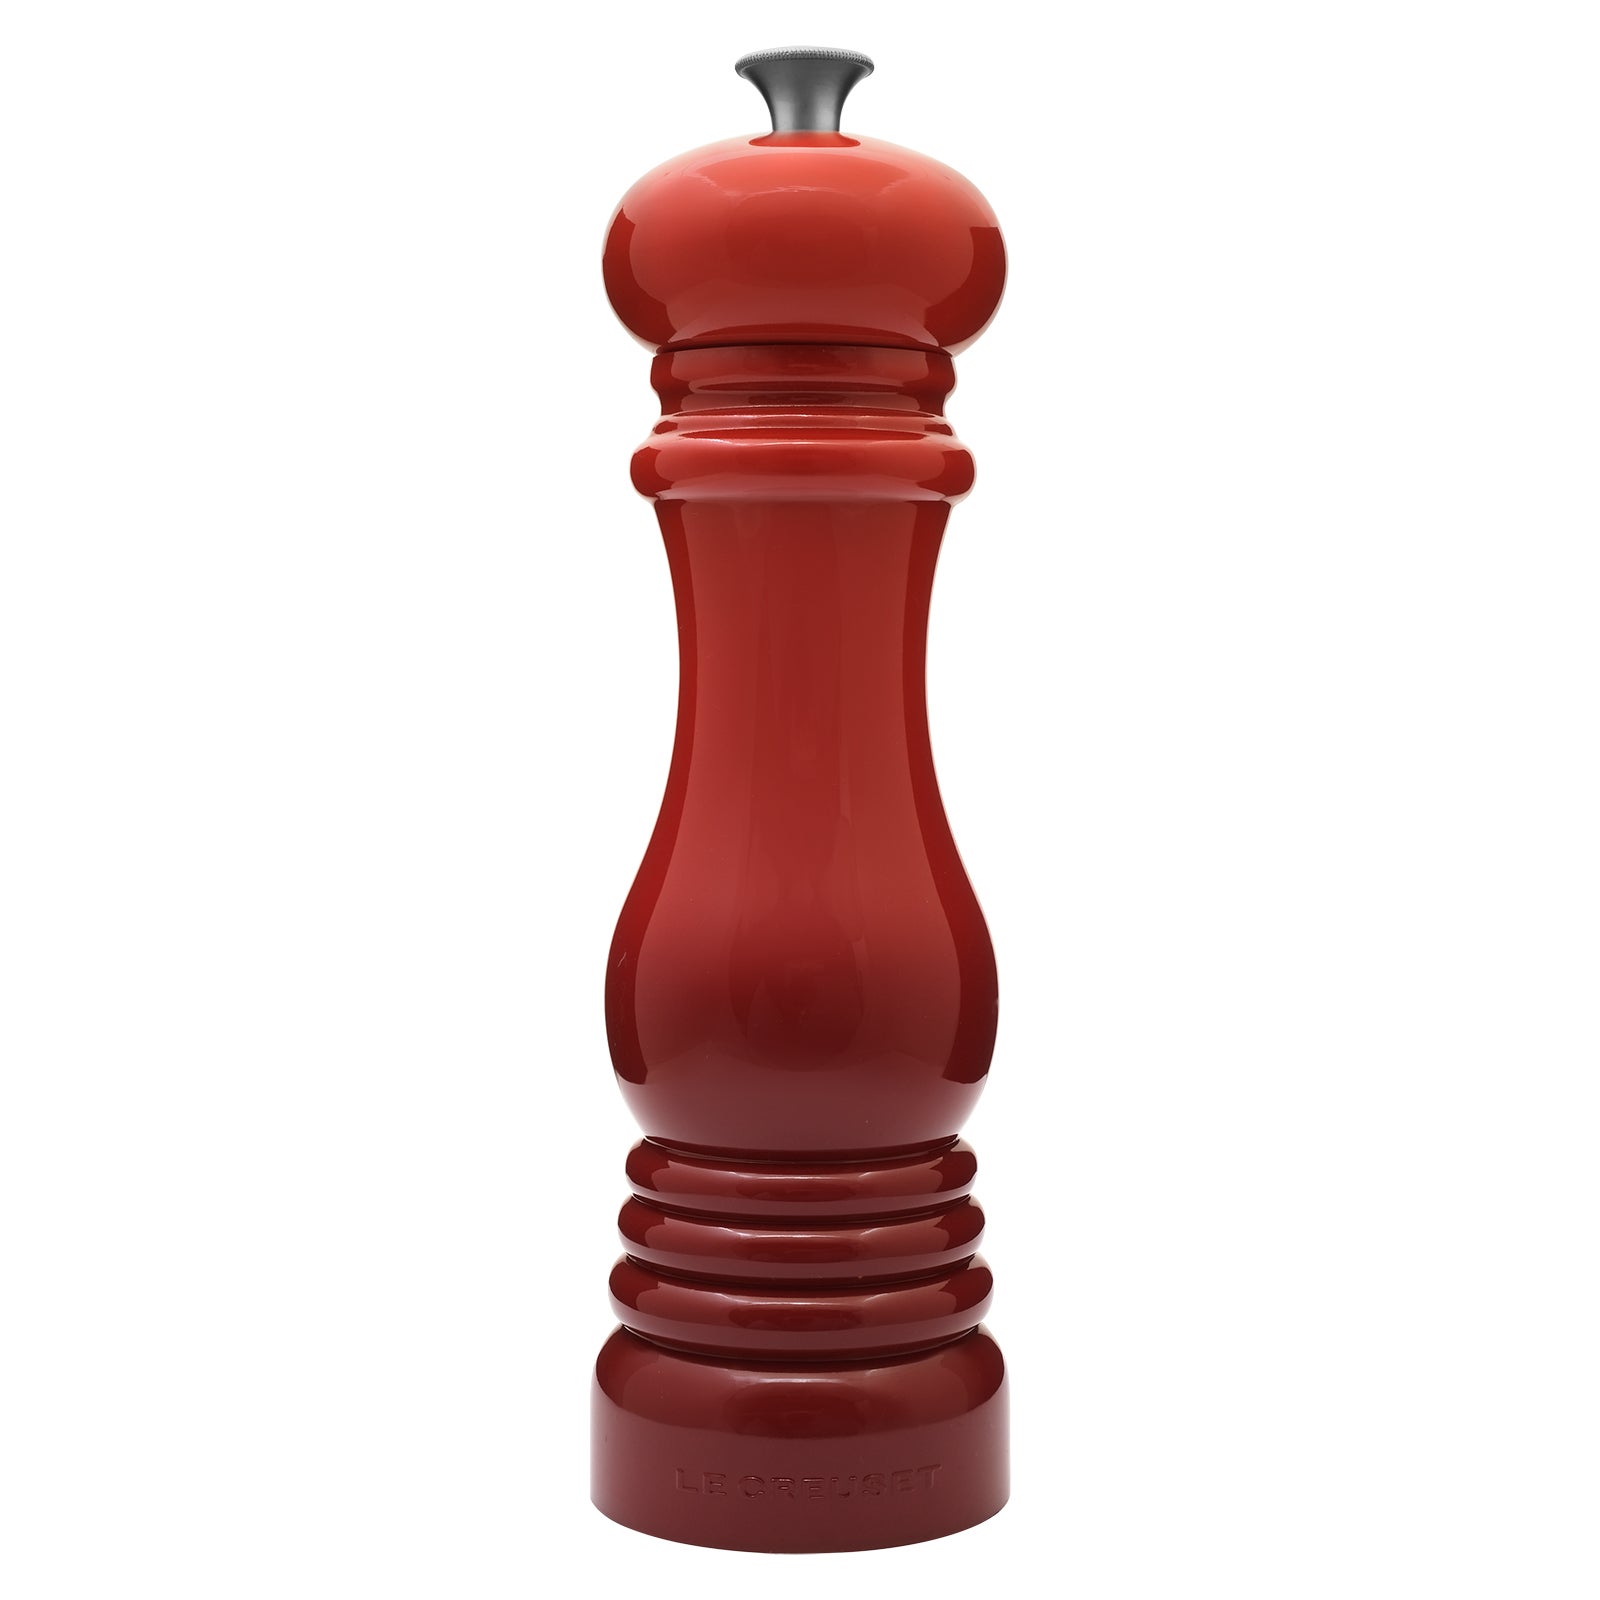 Le Creuset Classic Pepper Mill 21cm Cherry Red